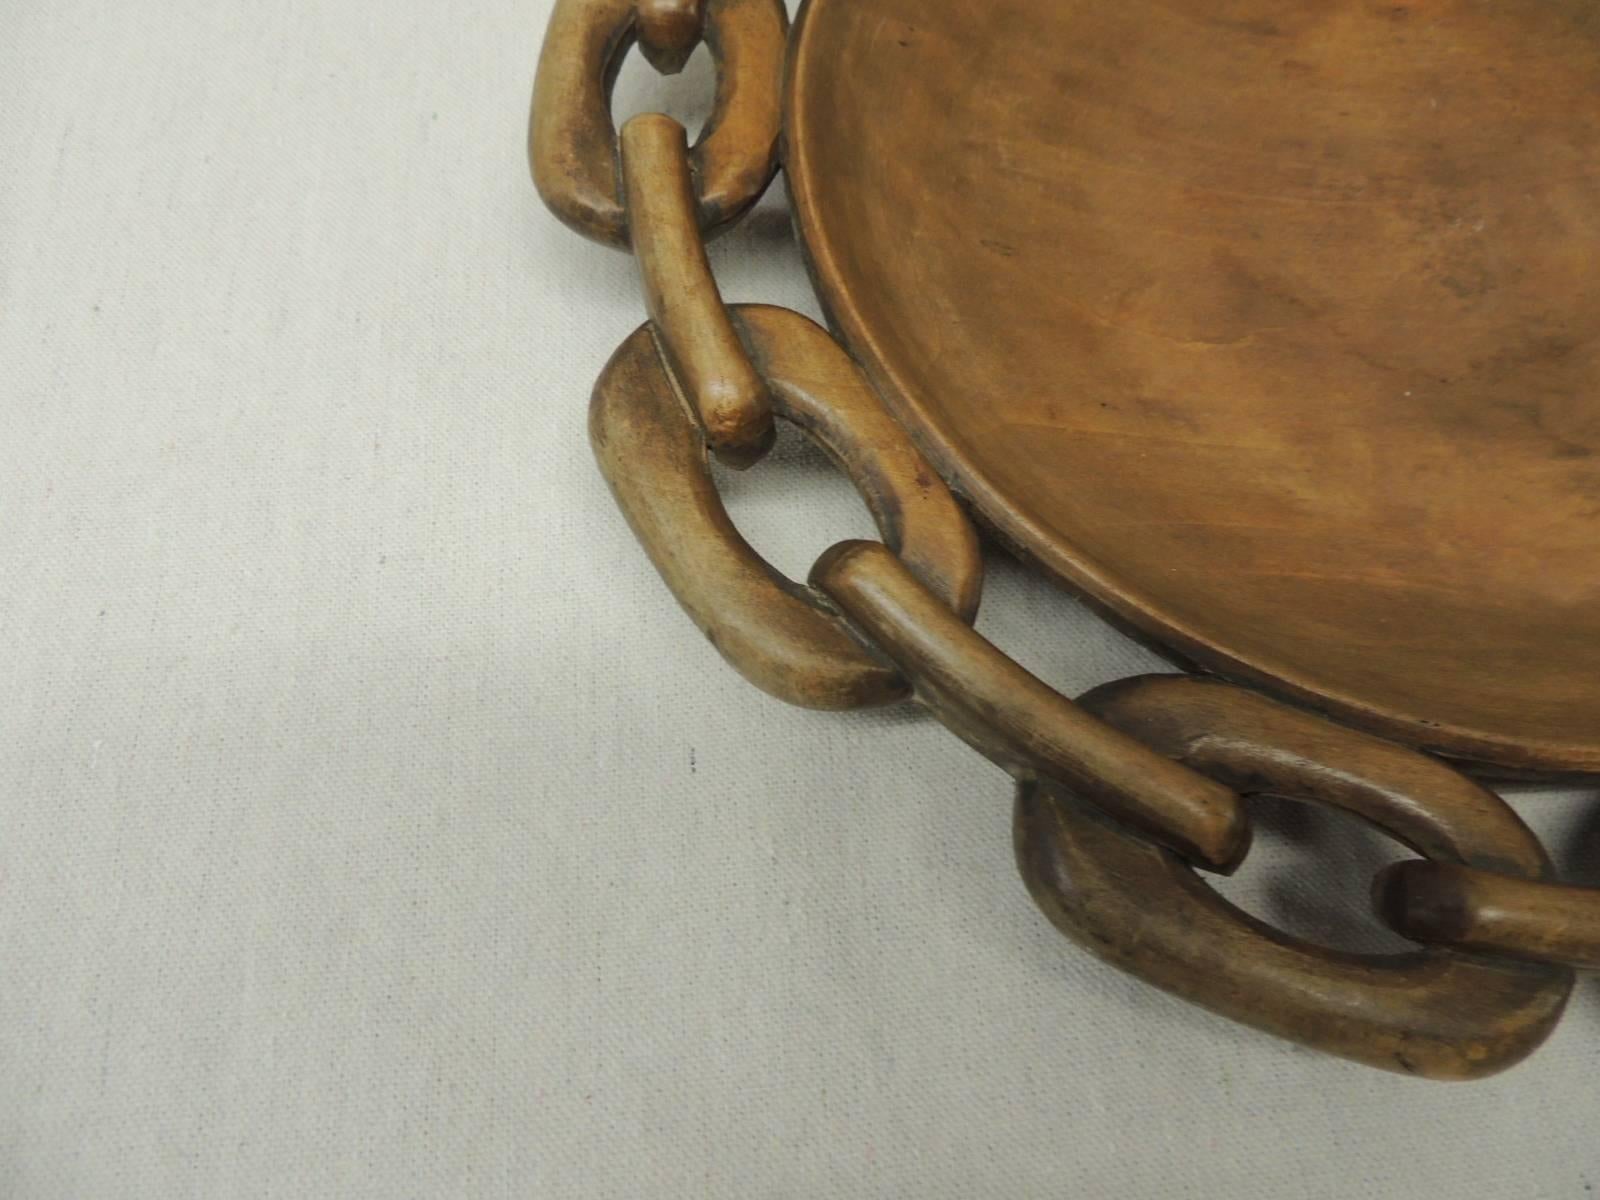 Vintage Mid-Century Modern round wood tray with links all around. Light wood finish. The links almost look like Gucci or Hermes pattern. Signed by the carver. Found in Paris.